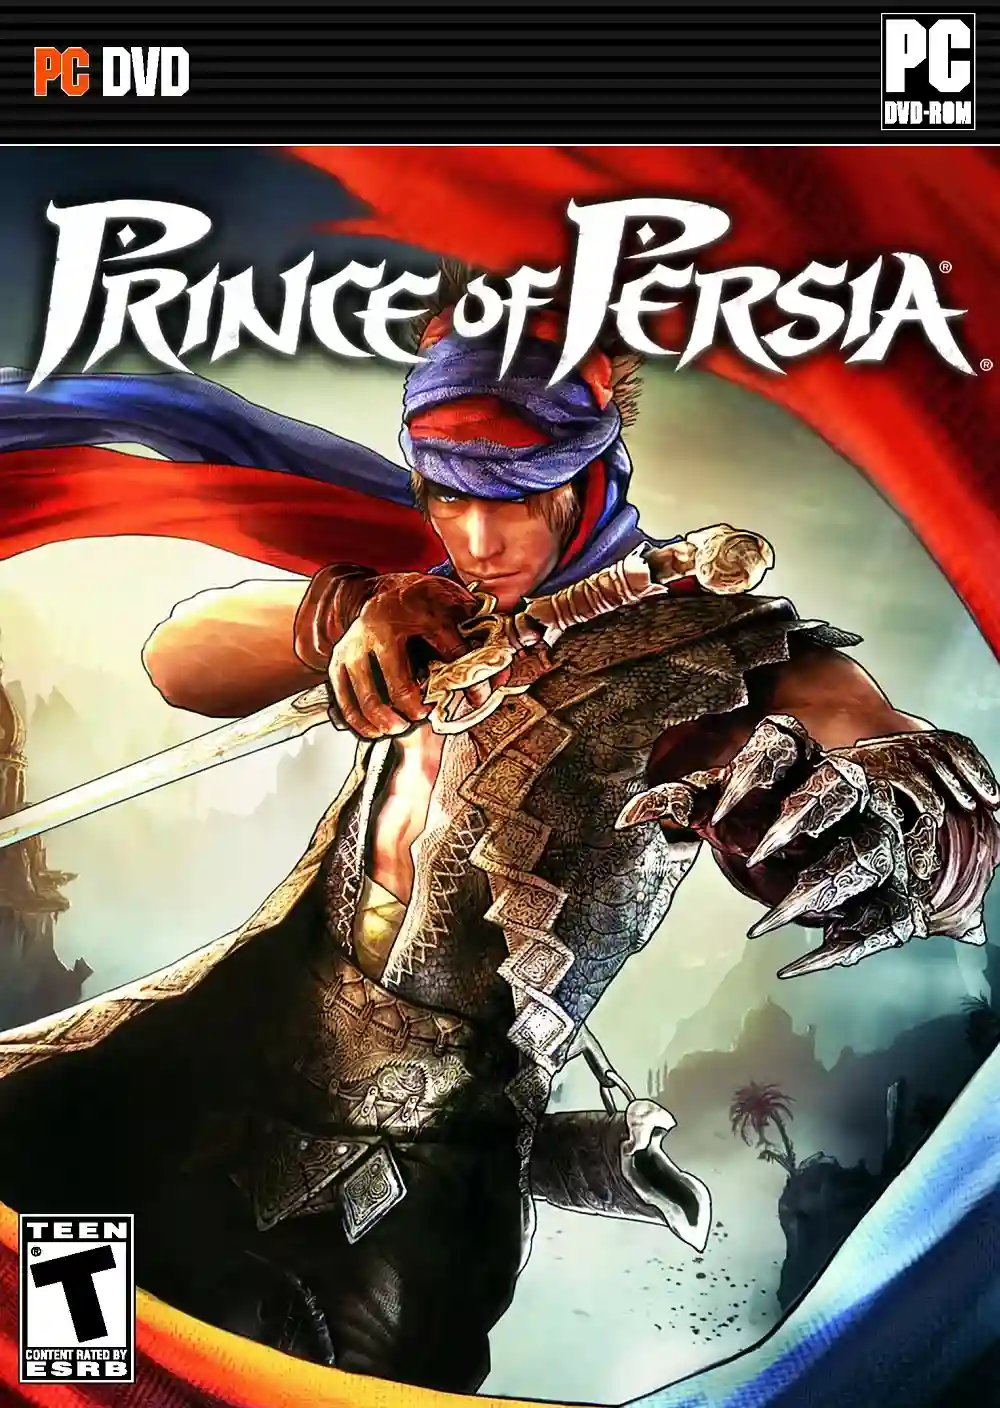 Prince of Persia final